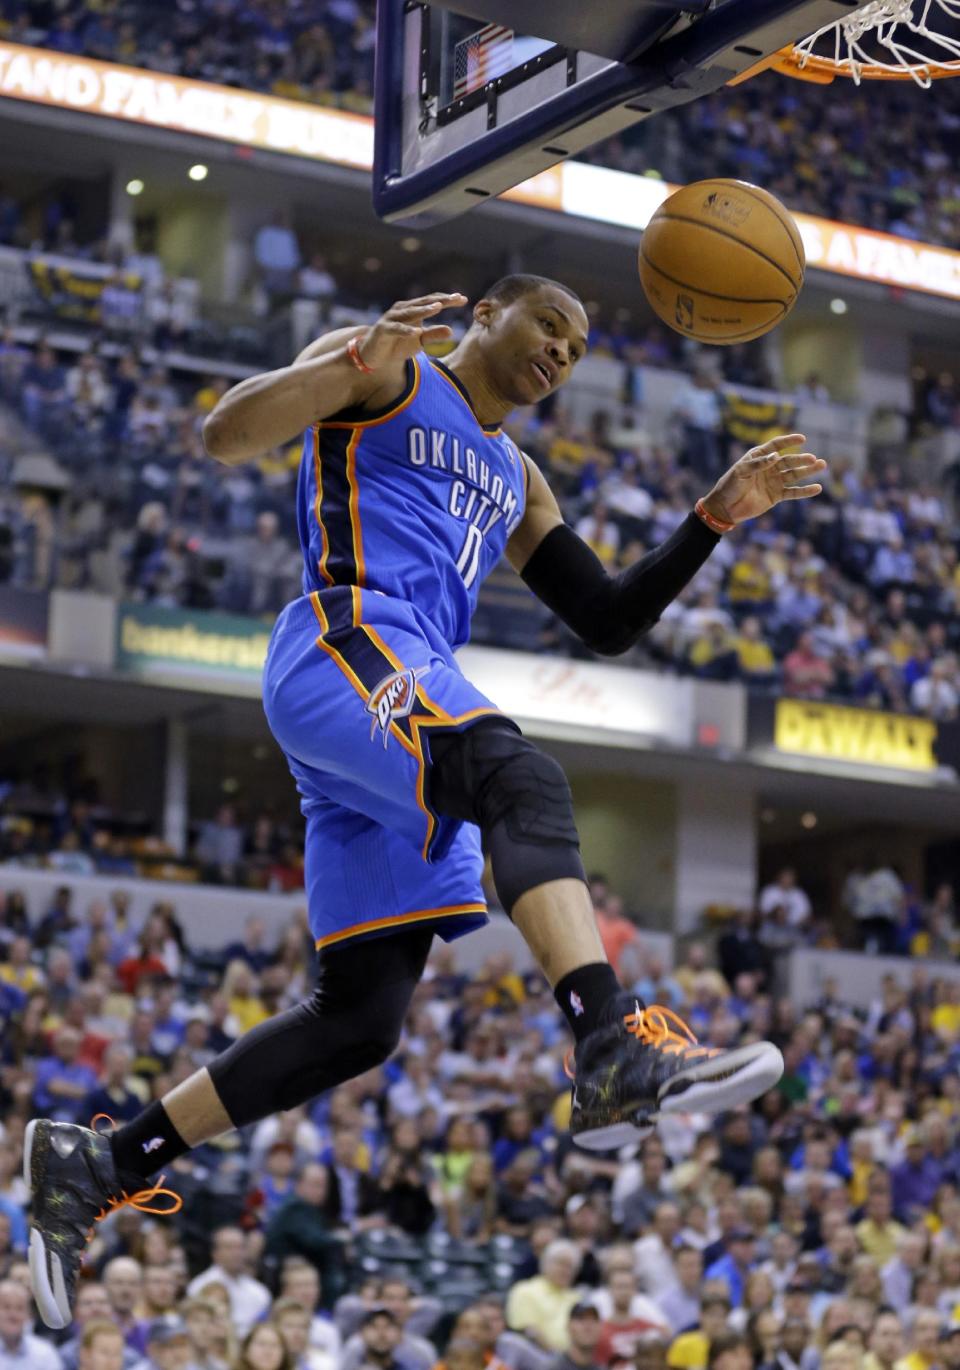 Oklahoma City Thunder guard Russell Westbrook comes down after a dunk against the Indiana Pacers in the second half of an NBA basketball game in Indianapolis, Sunday, April 13, 2014. (AP Photo/Michael Conroy)